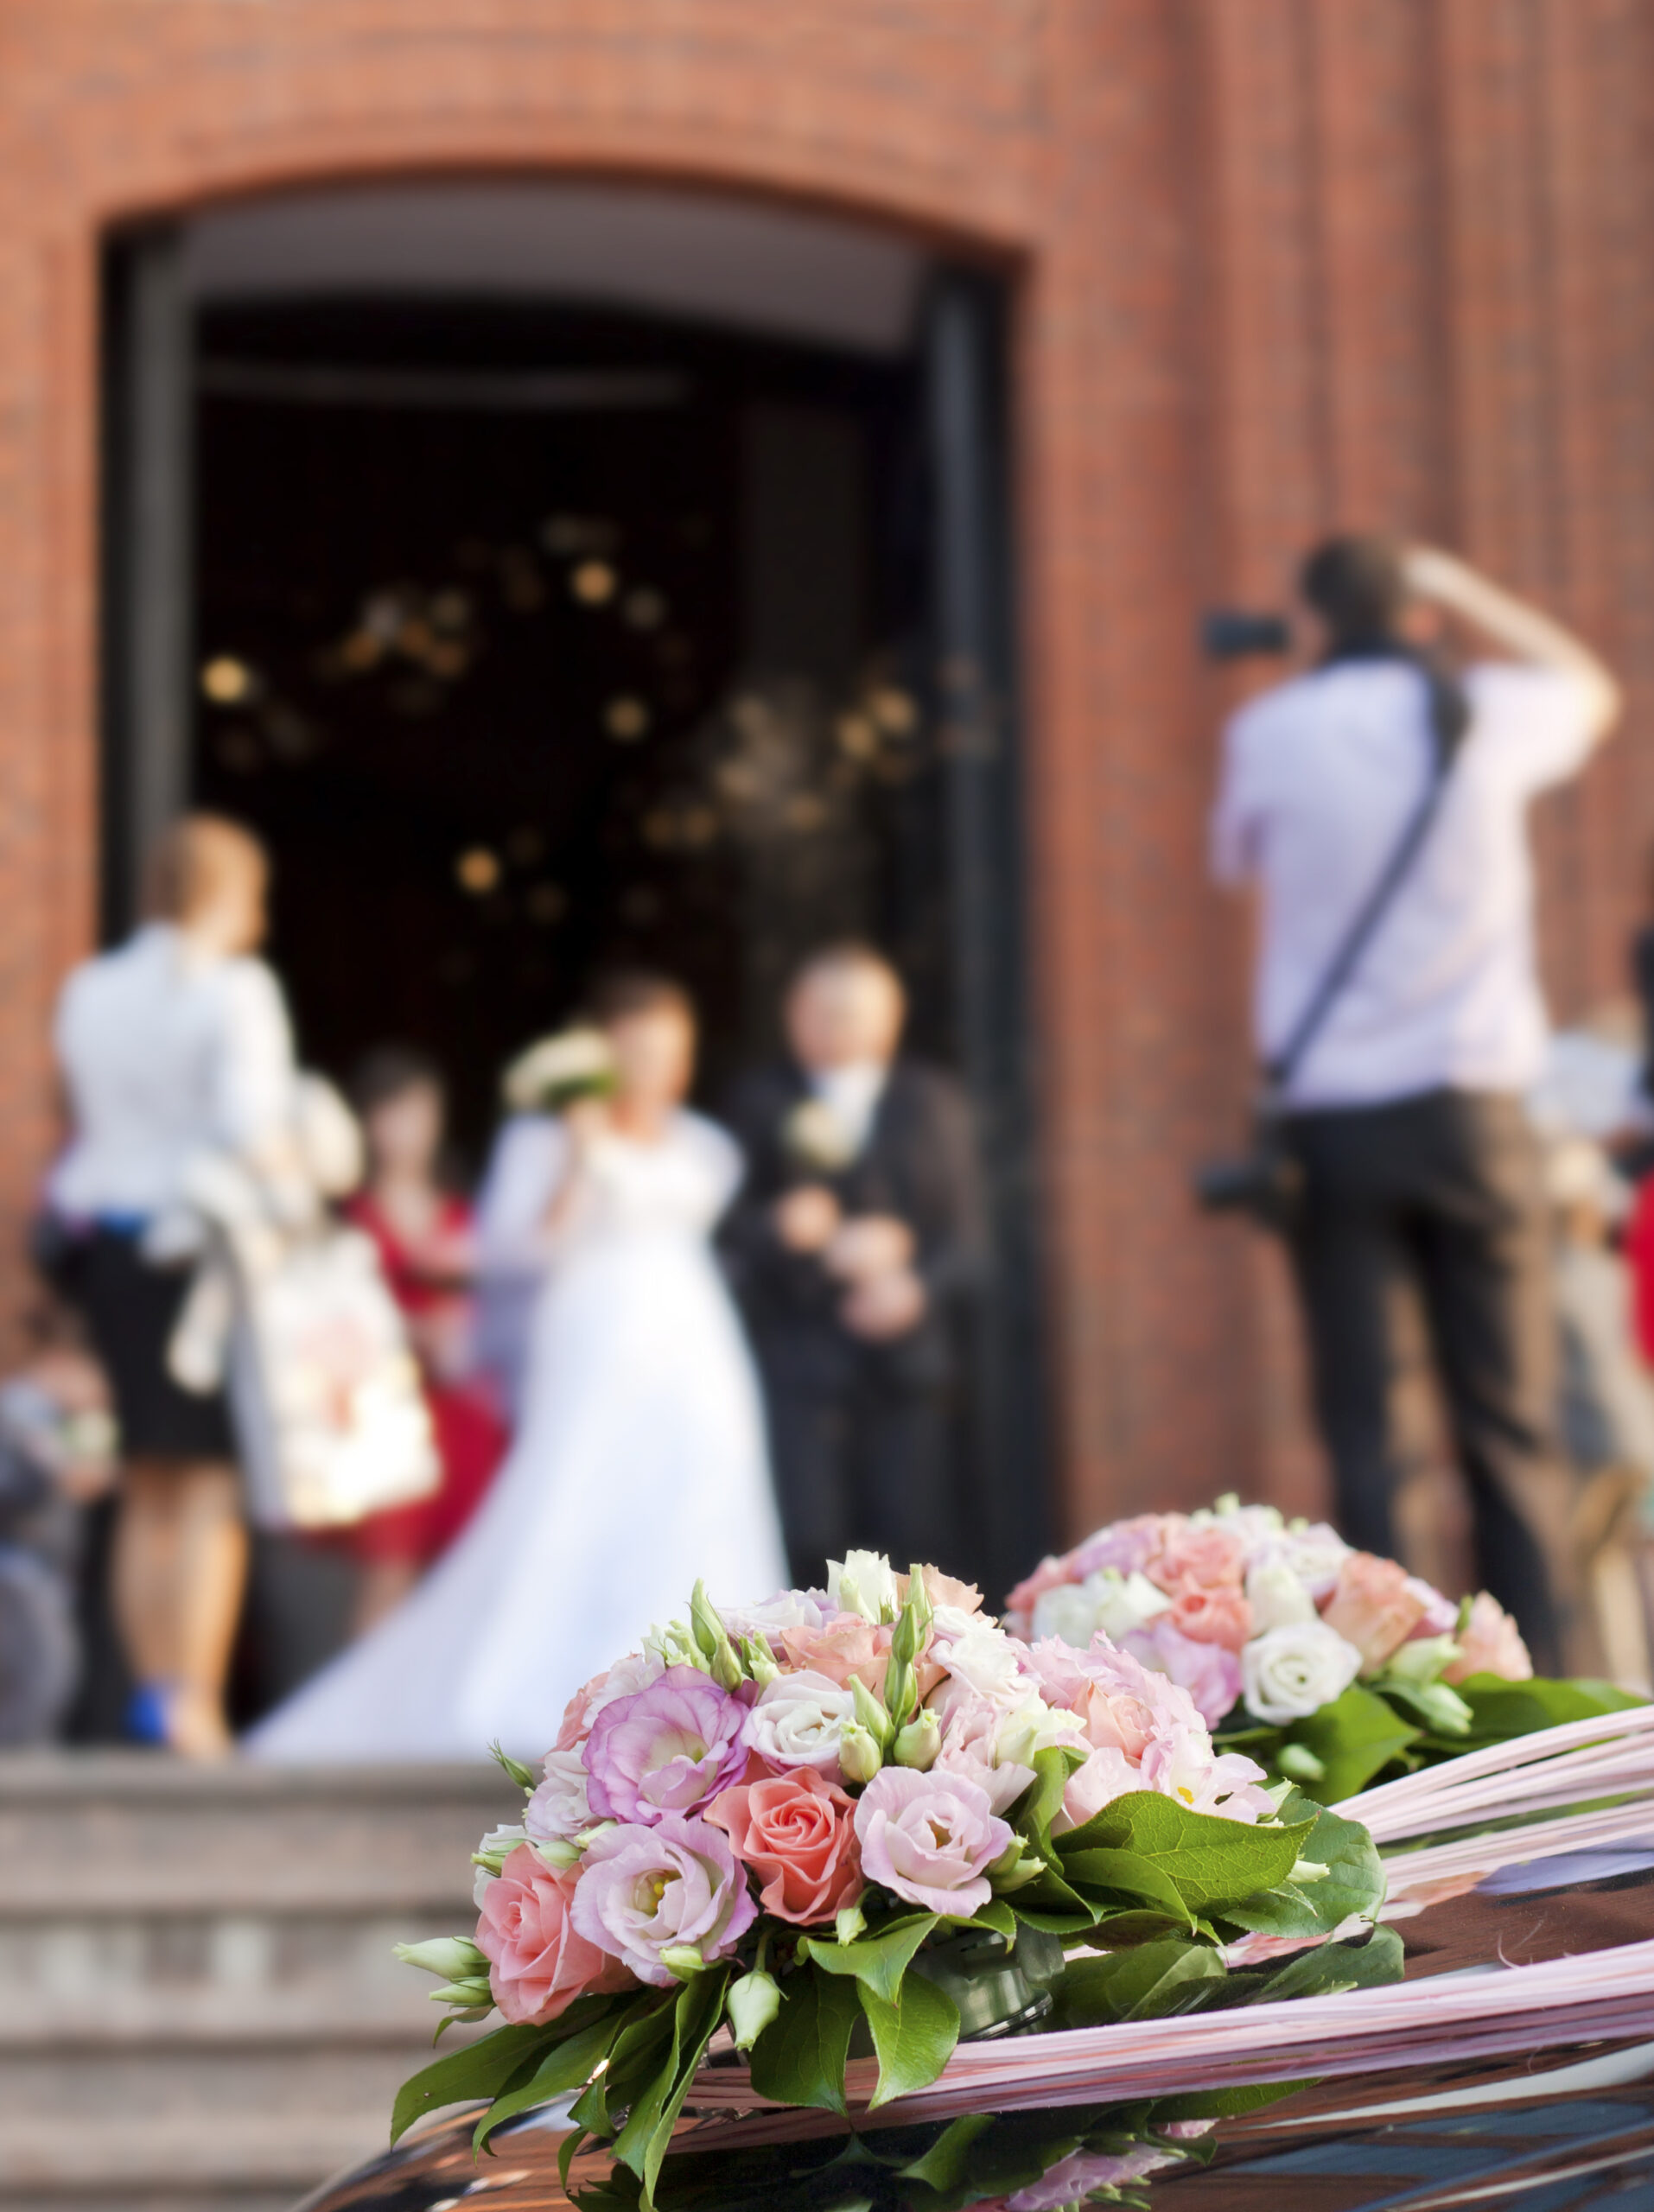 How to choose a wedding photographer